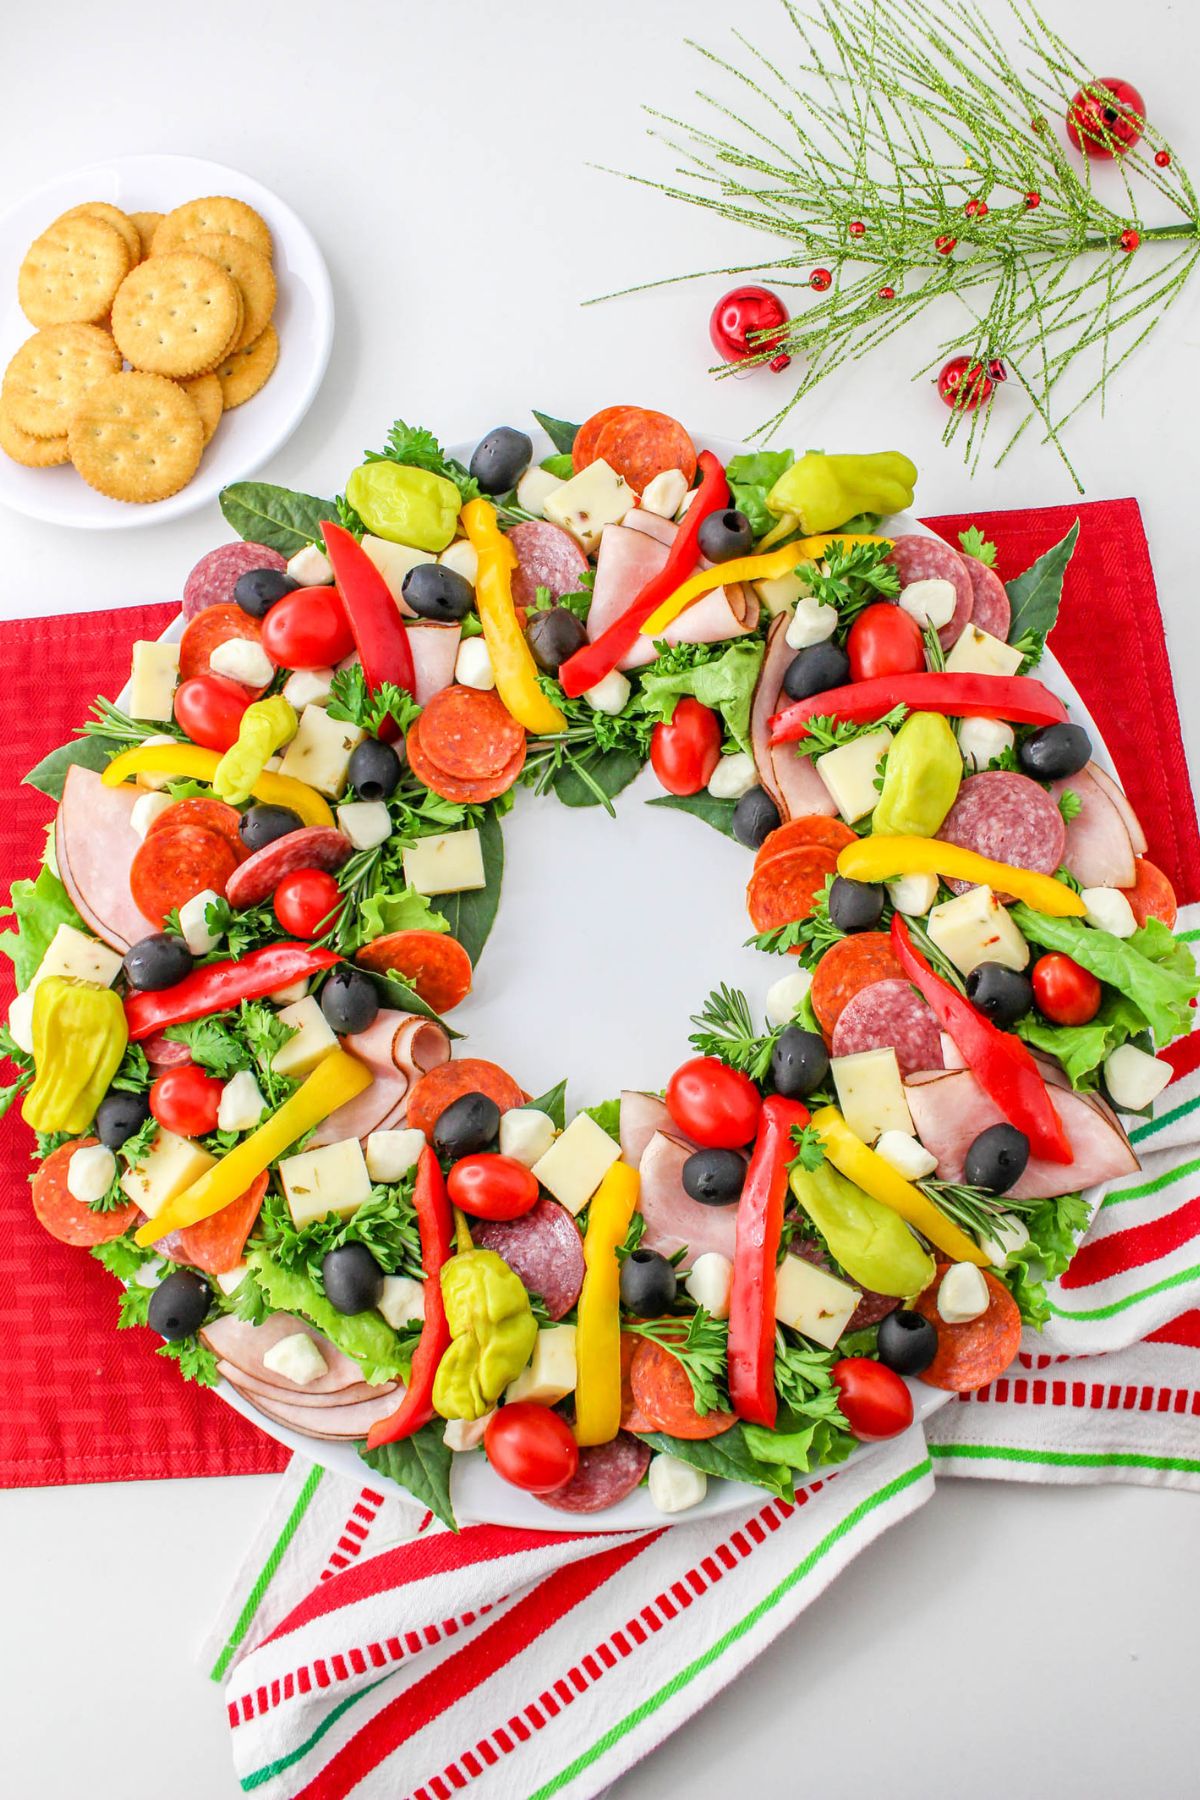 A wreath of vegetables and meats on a plate.